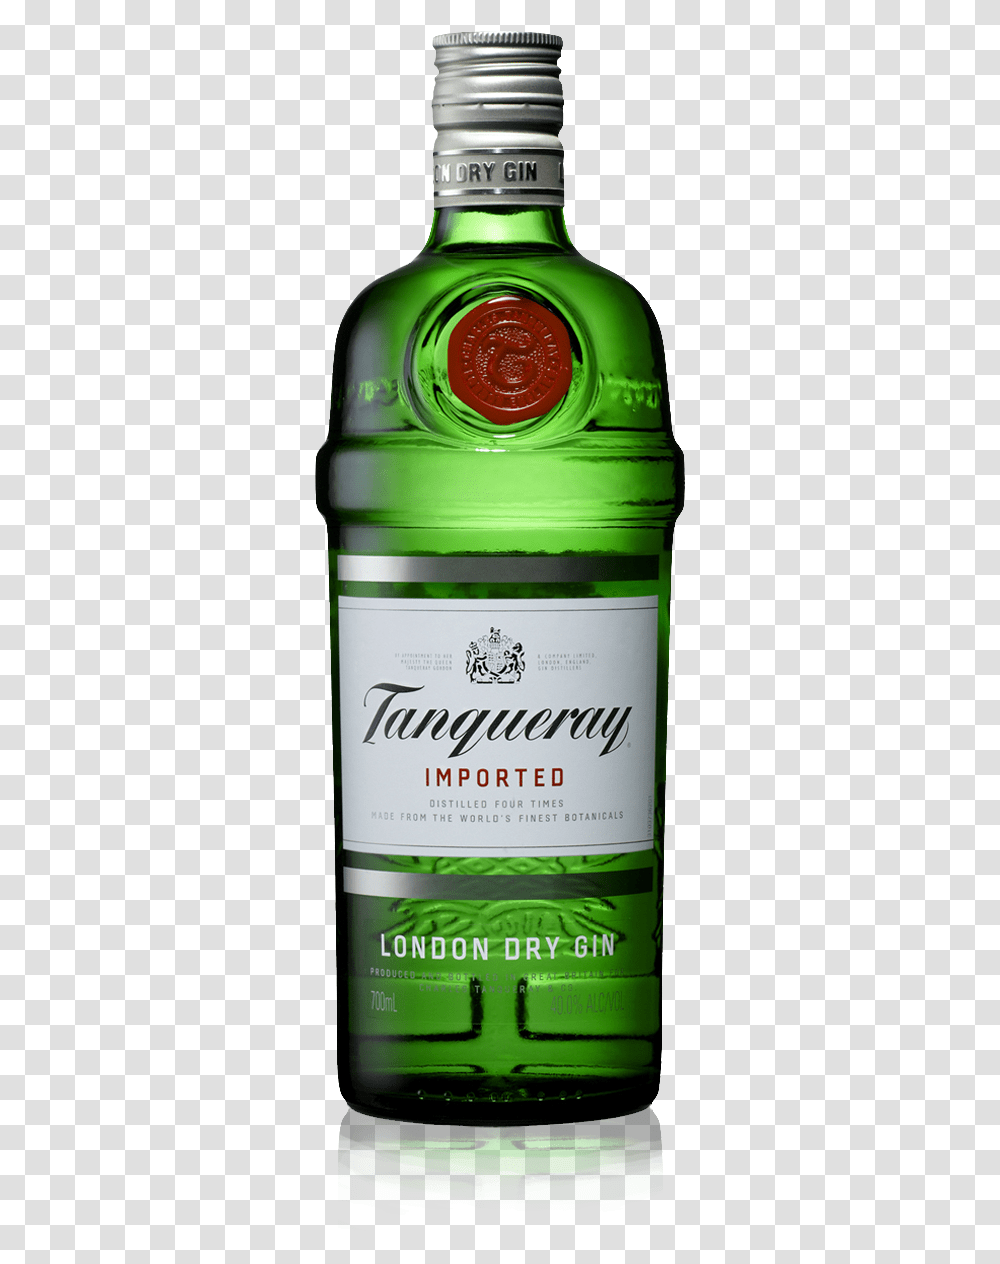 Tanqueray Bottle Gin Tanqueray London Dry Gin, Liquor, Alcohol, Beverage, Drink Transparent Png